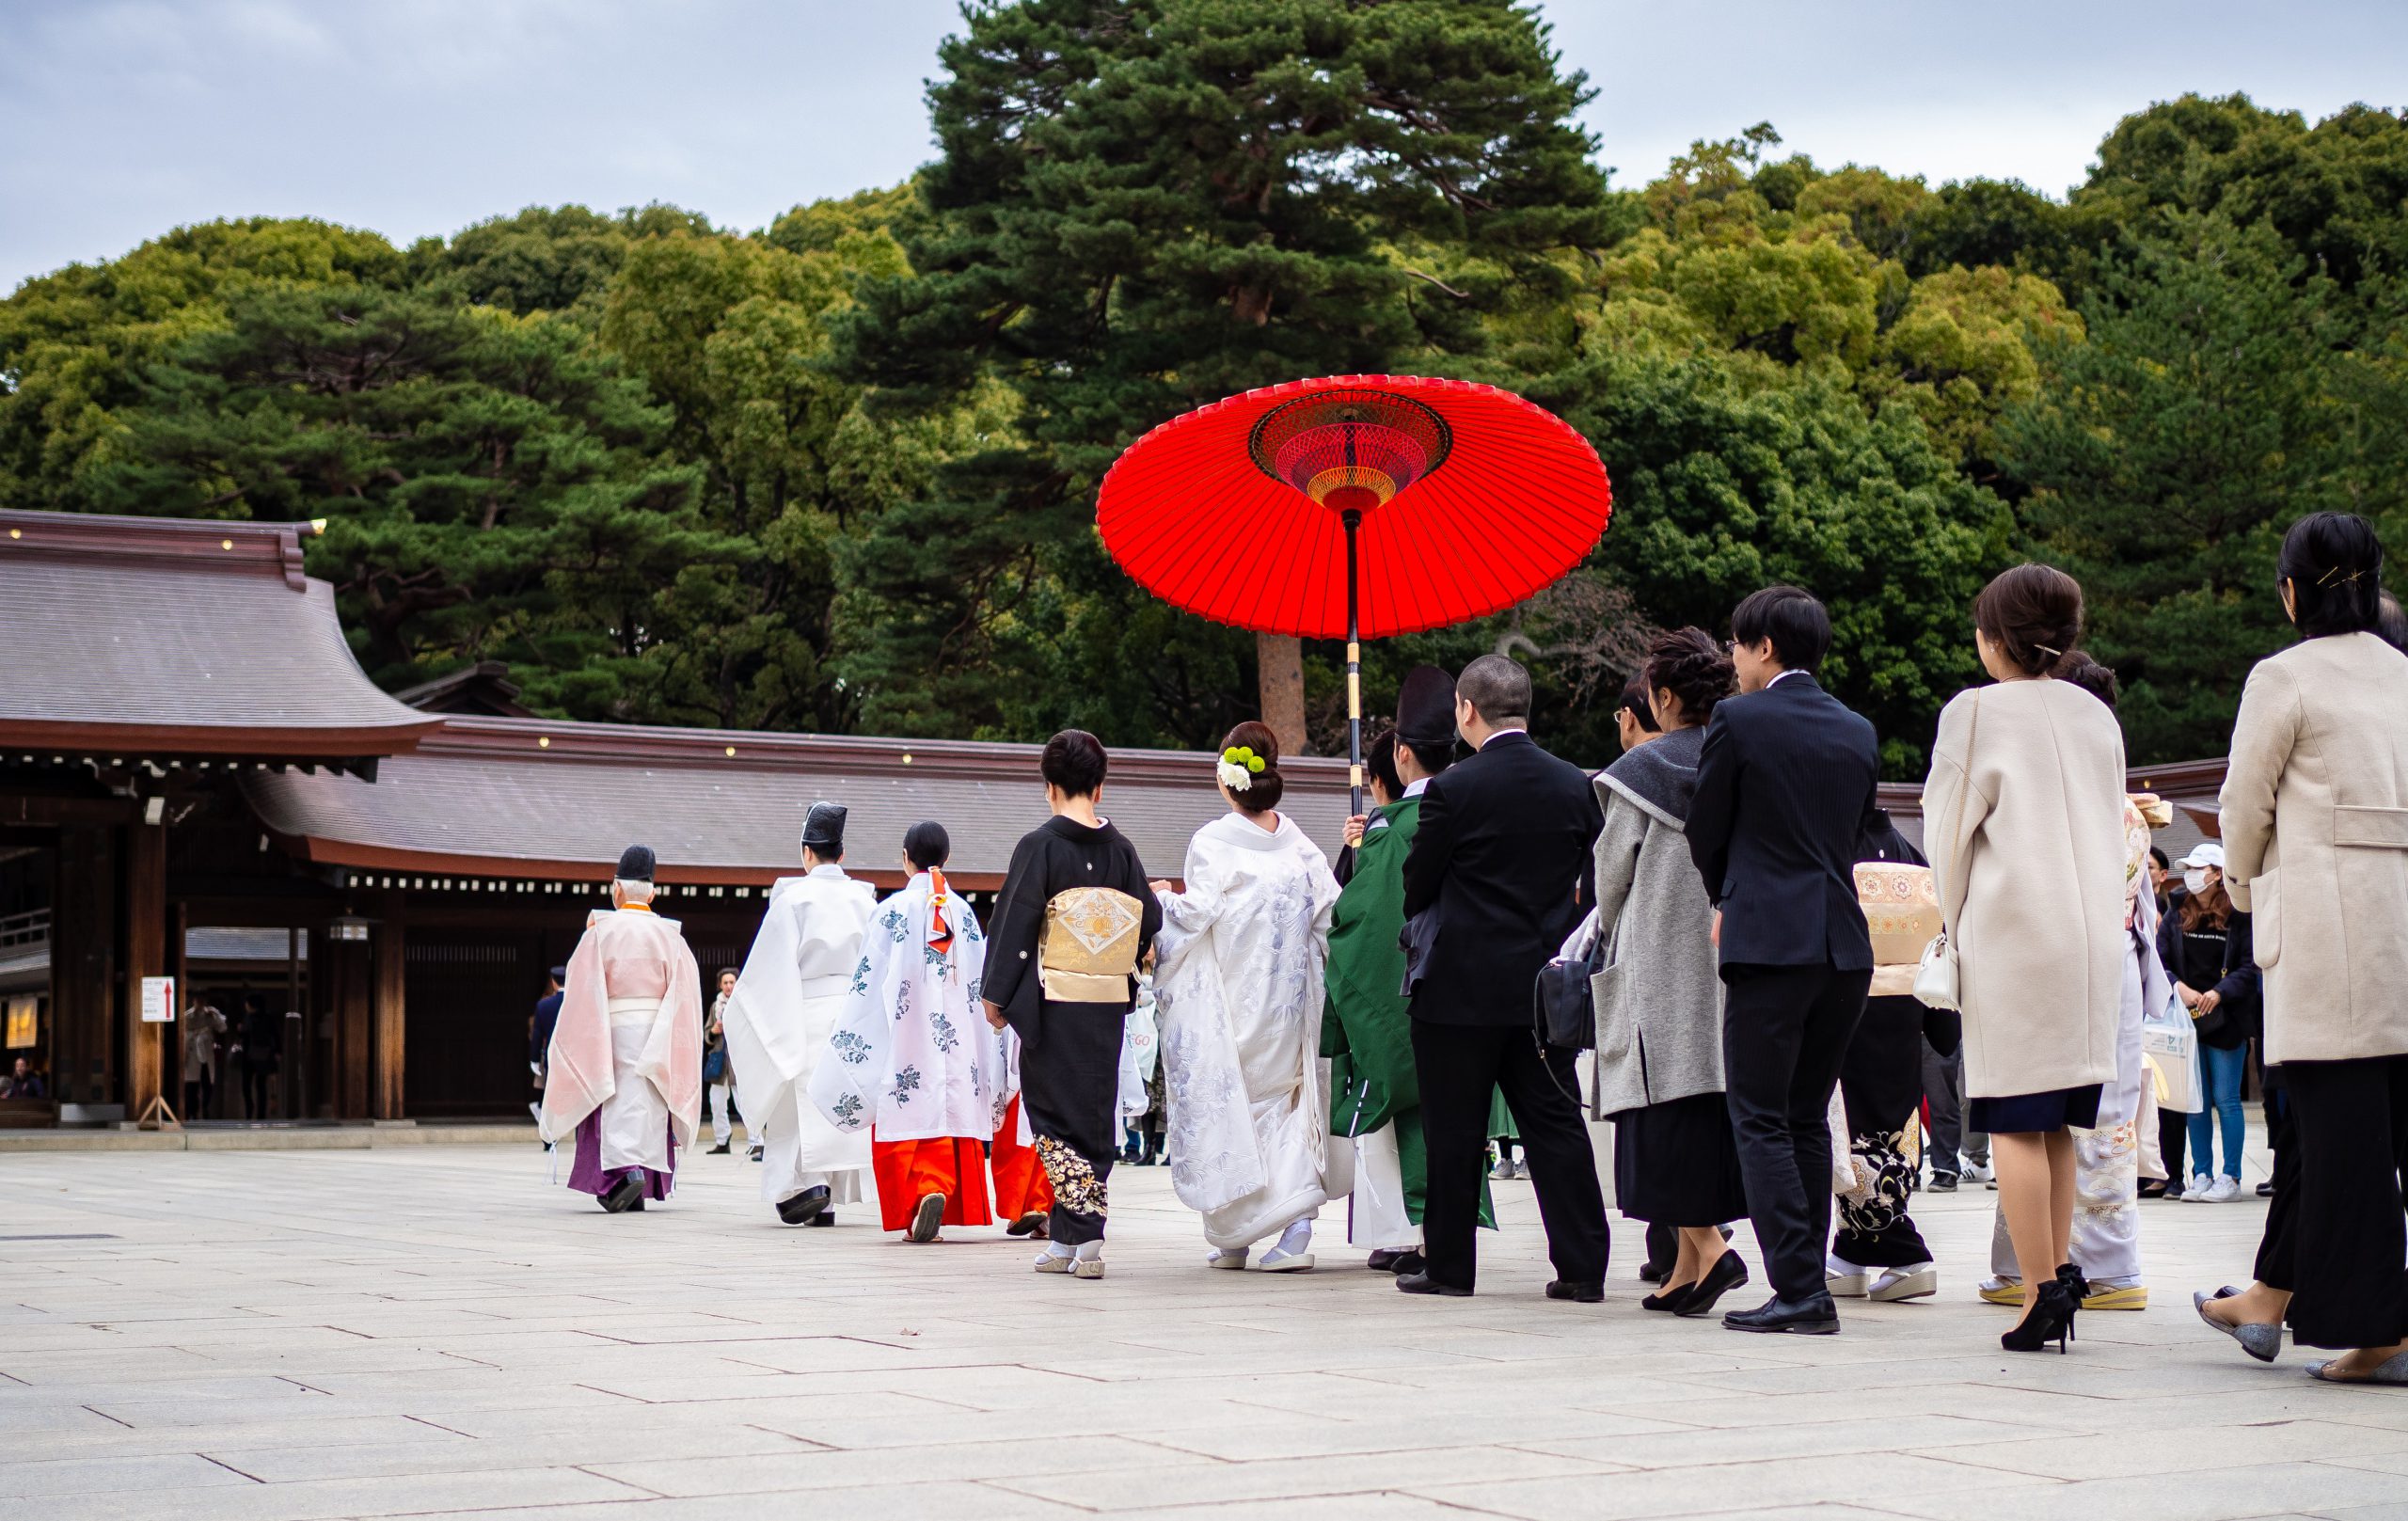 Japanese Traditional Wedding: All You Need to Know